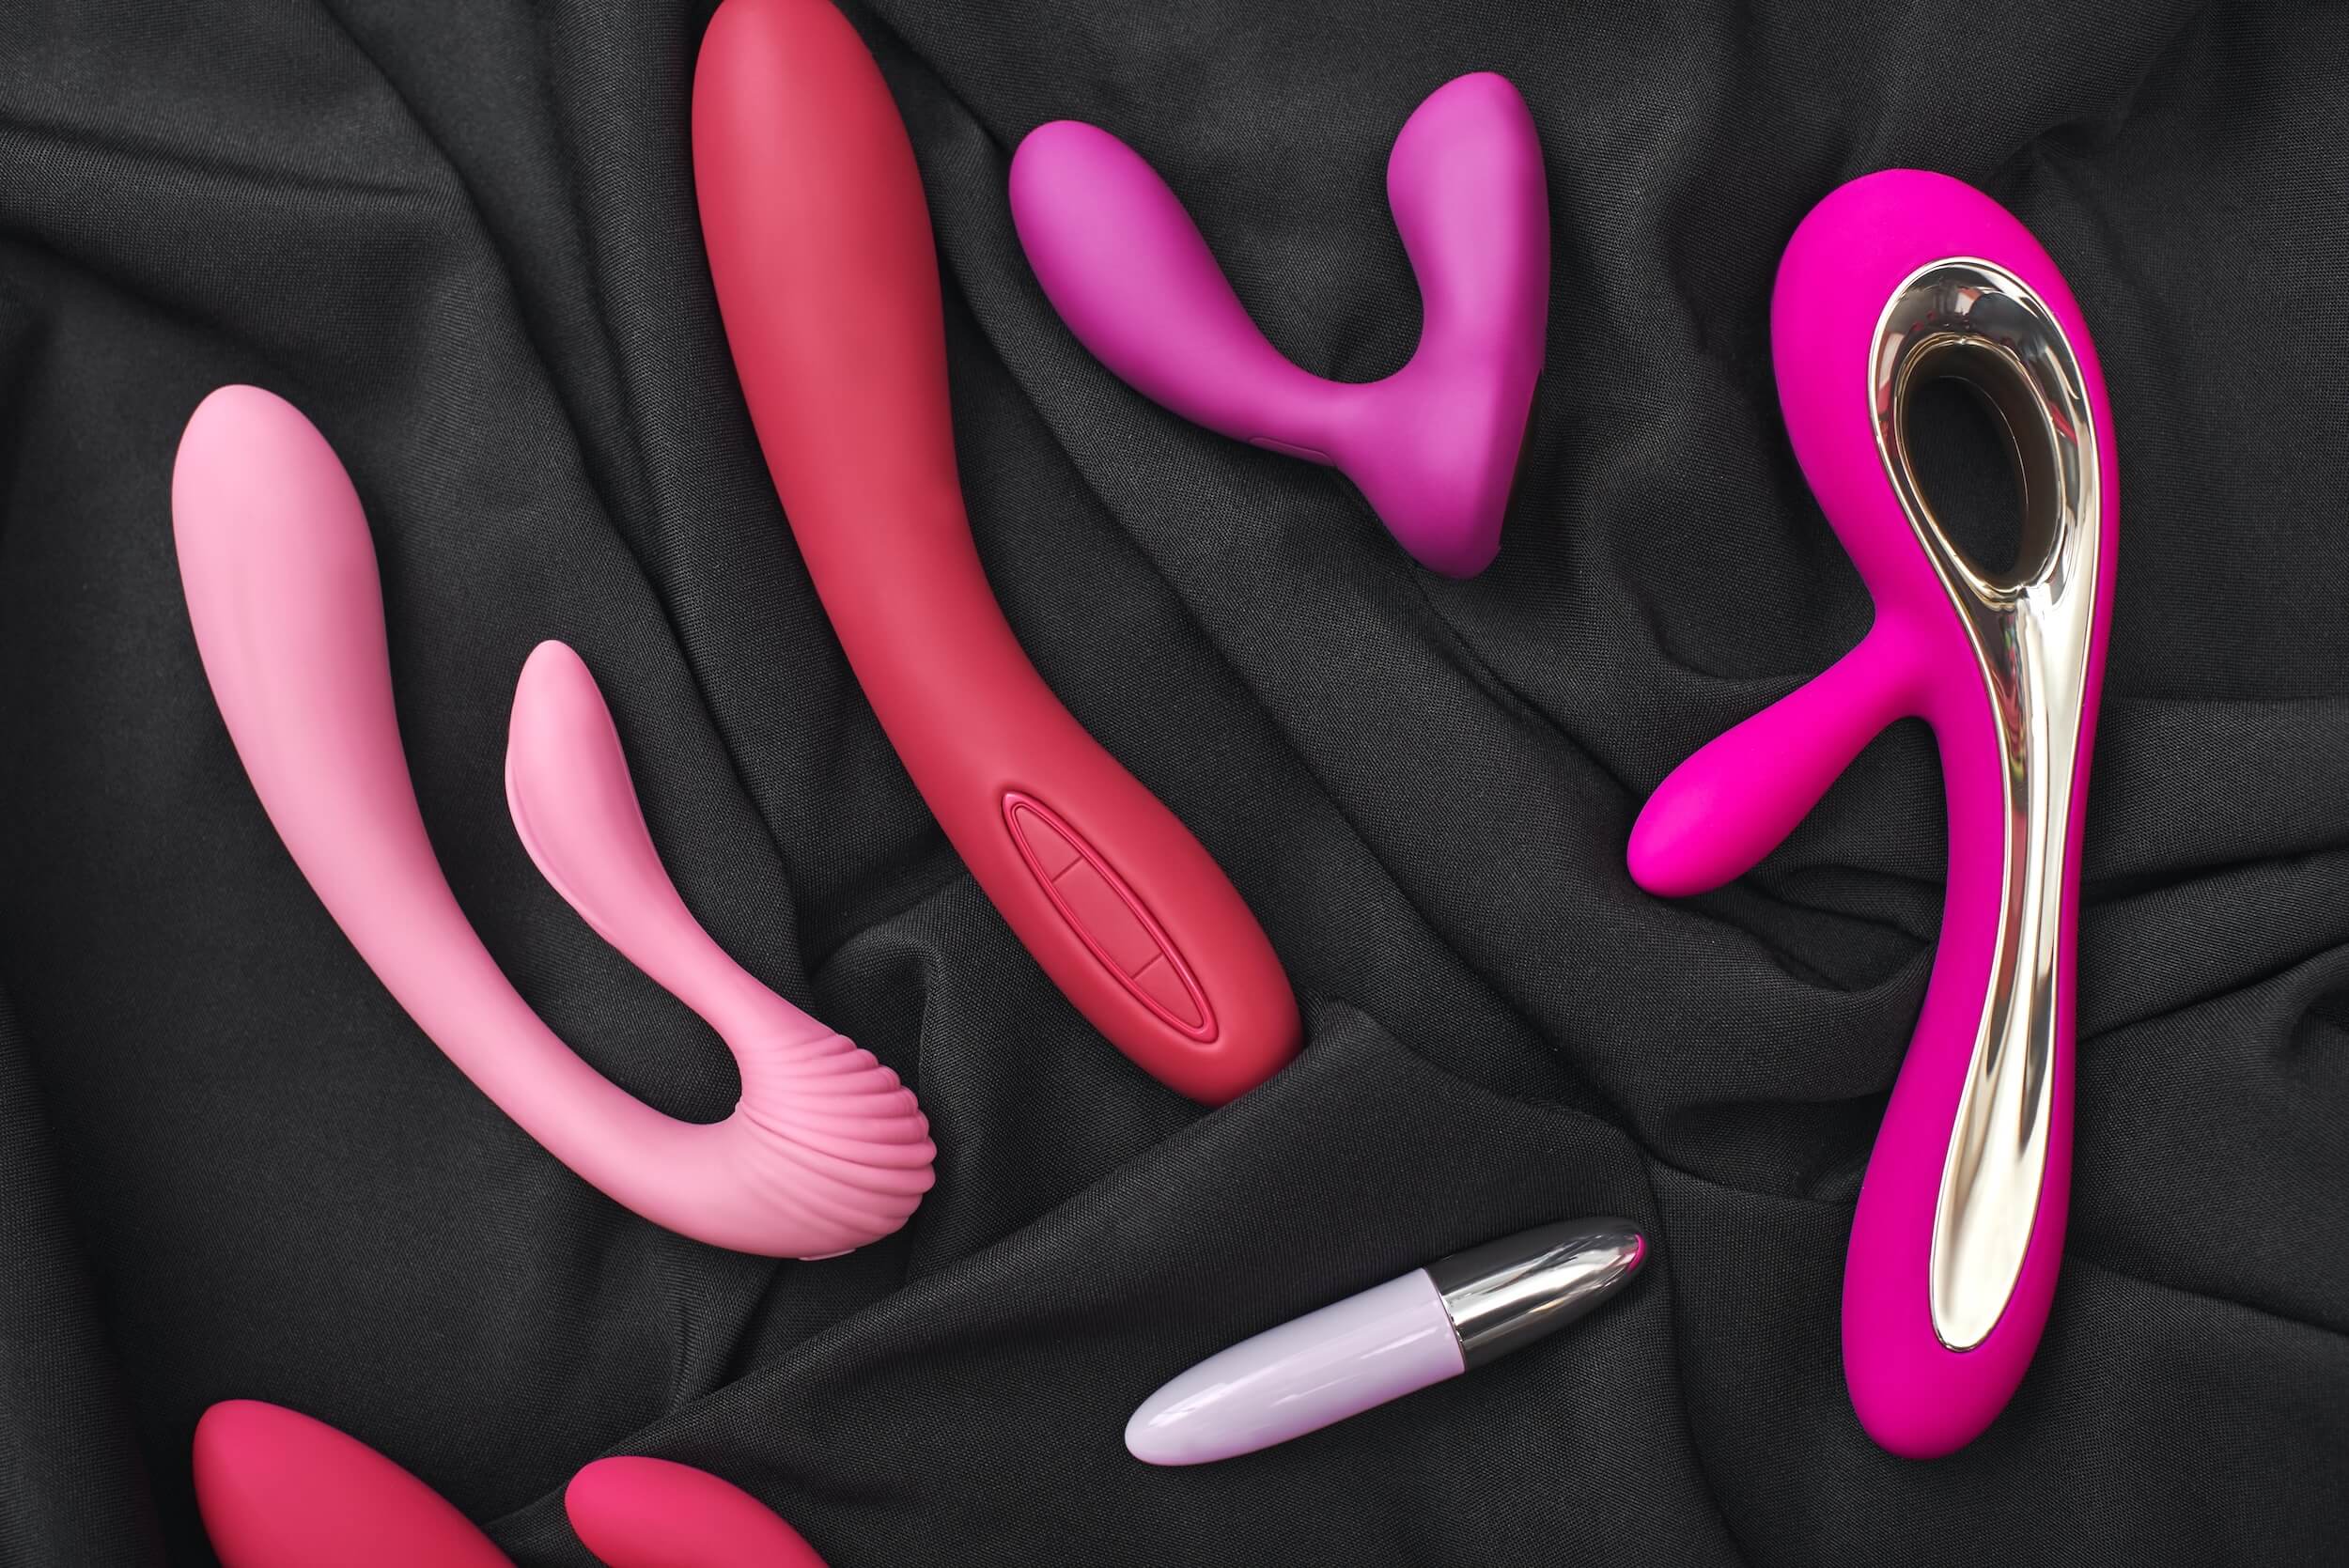 variety of vibrators that your partner would surely love to get as a present this holiday season